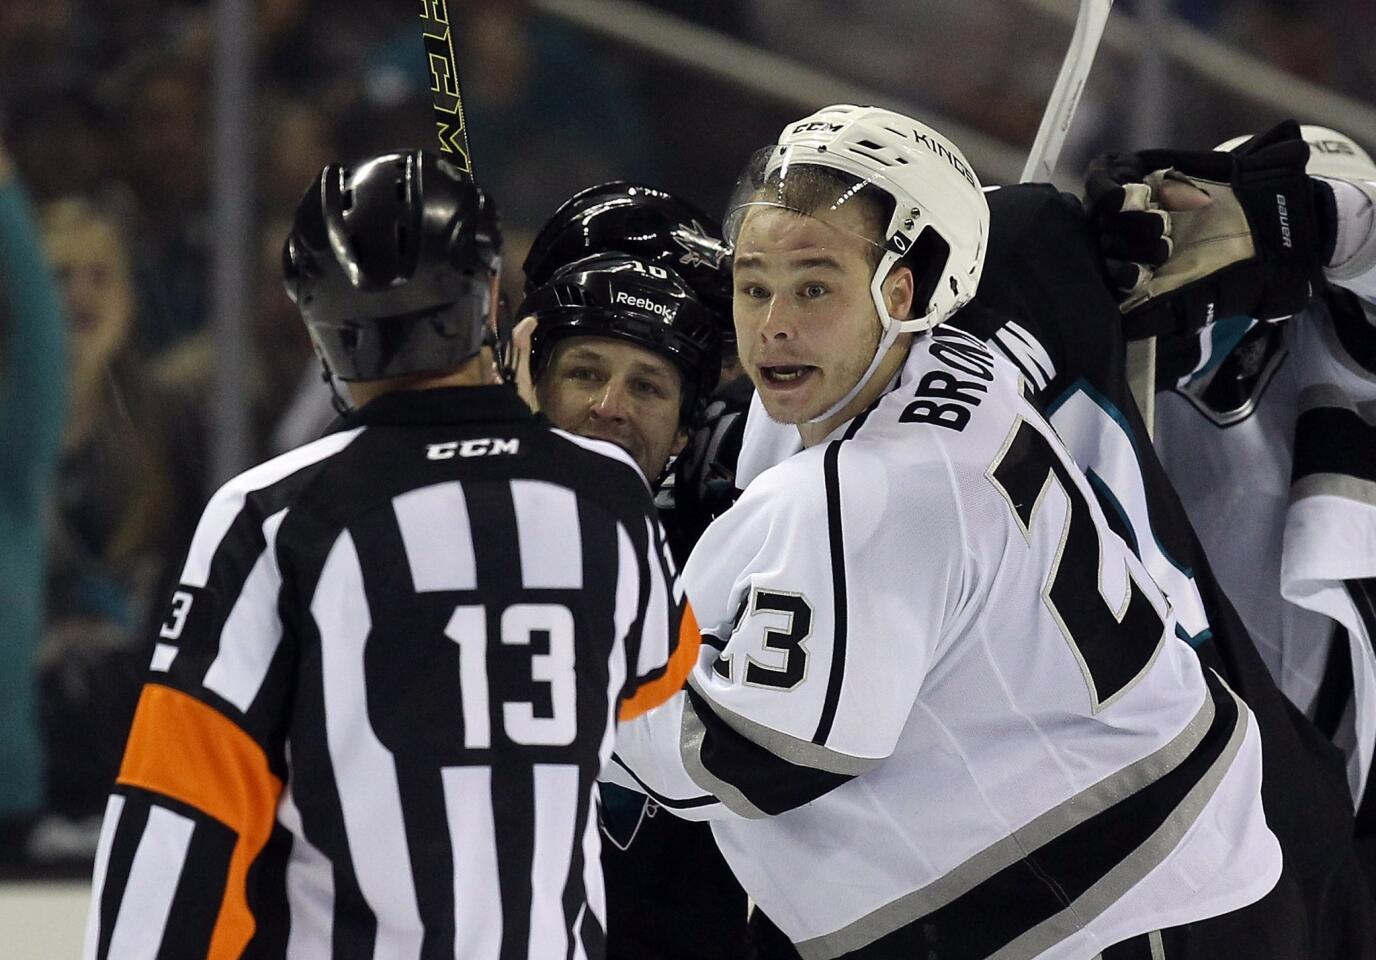 Kings captain Dustin Brown complains to referee Dan O'Halloran in the third period of Game 2 of the first-round playoff series against the Sharks on Sunday night at SAP Center in San Jose.